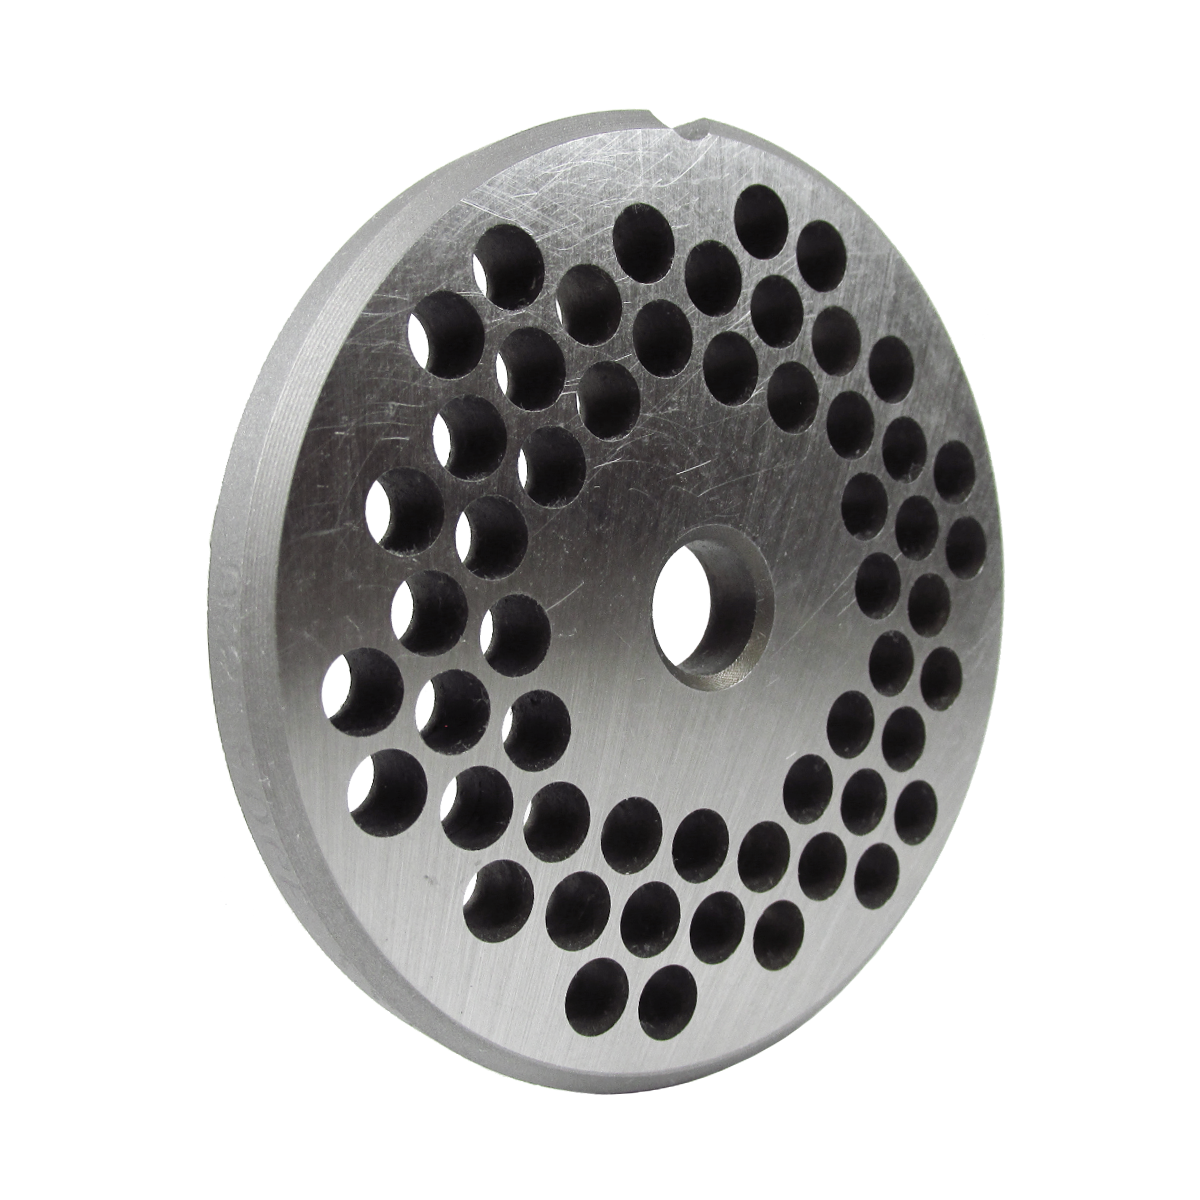 Grinder plate for #22 grinders with 3/16" hole, reversible